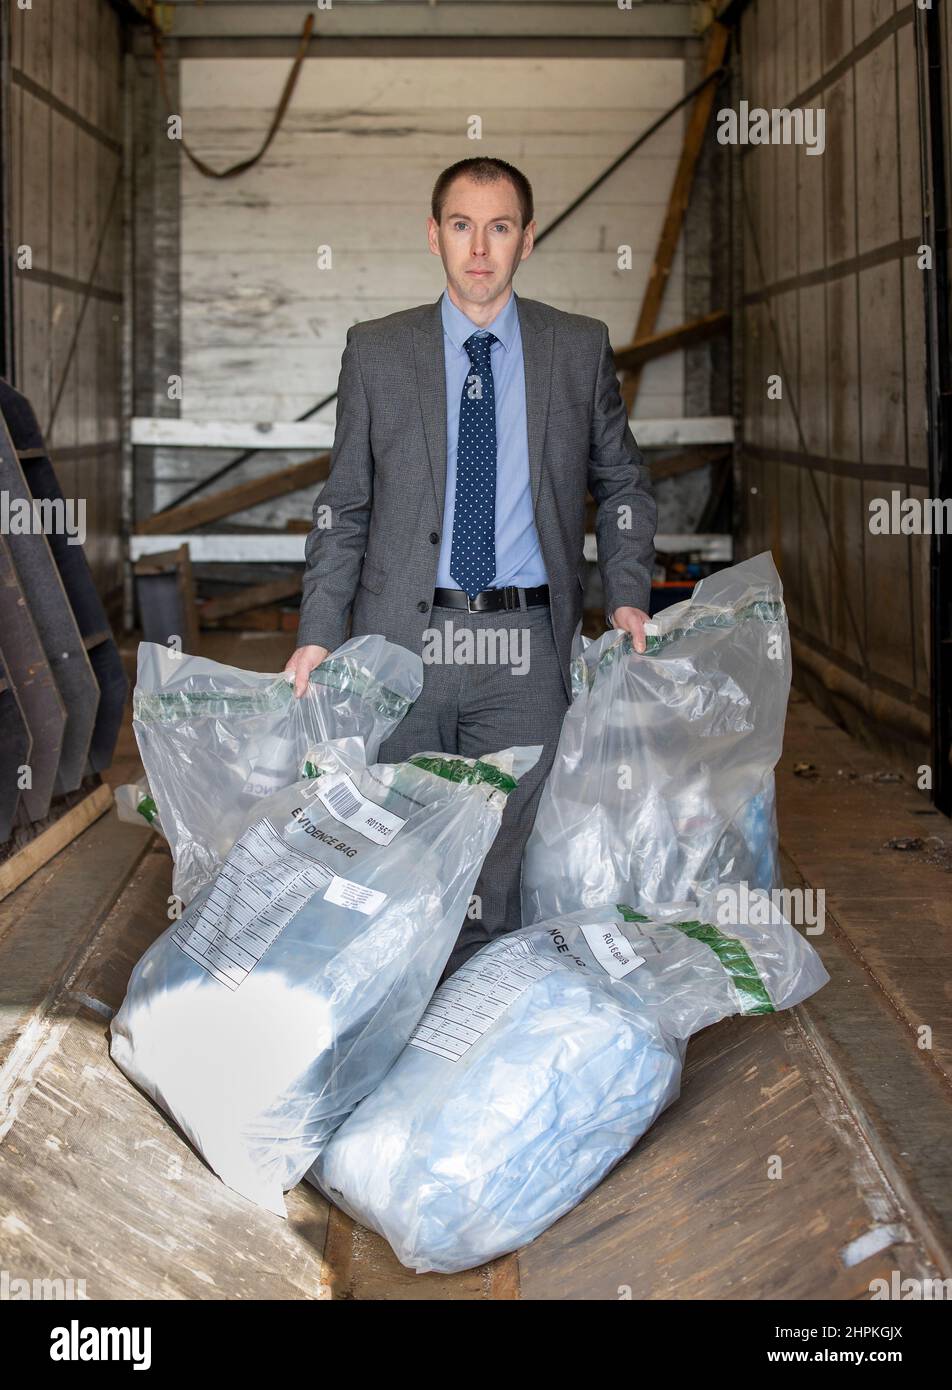 Police Service of Northern Ireland (PSNI) Detective Inspector Conor Sweeney of the Organised Crime Task Force at location in Greater Belfast, showing part of a £3 million drug seizure that was intercepted at Belfast Harbour. The find is one of Northern Ireland's largest recorded. Stock Photo